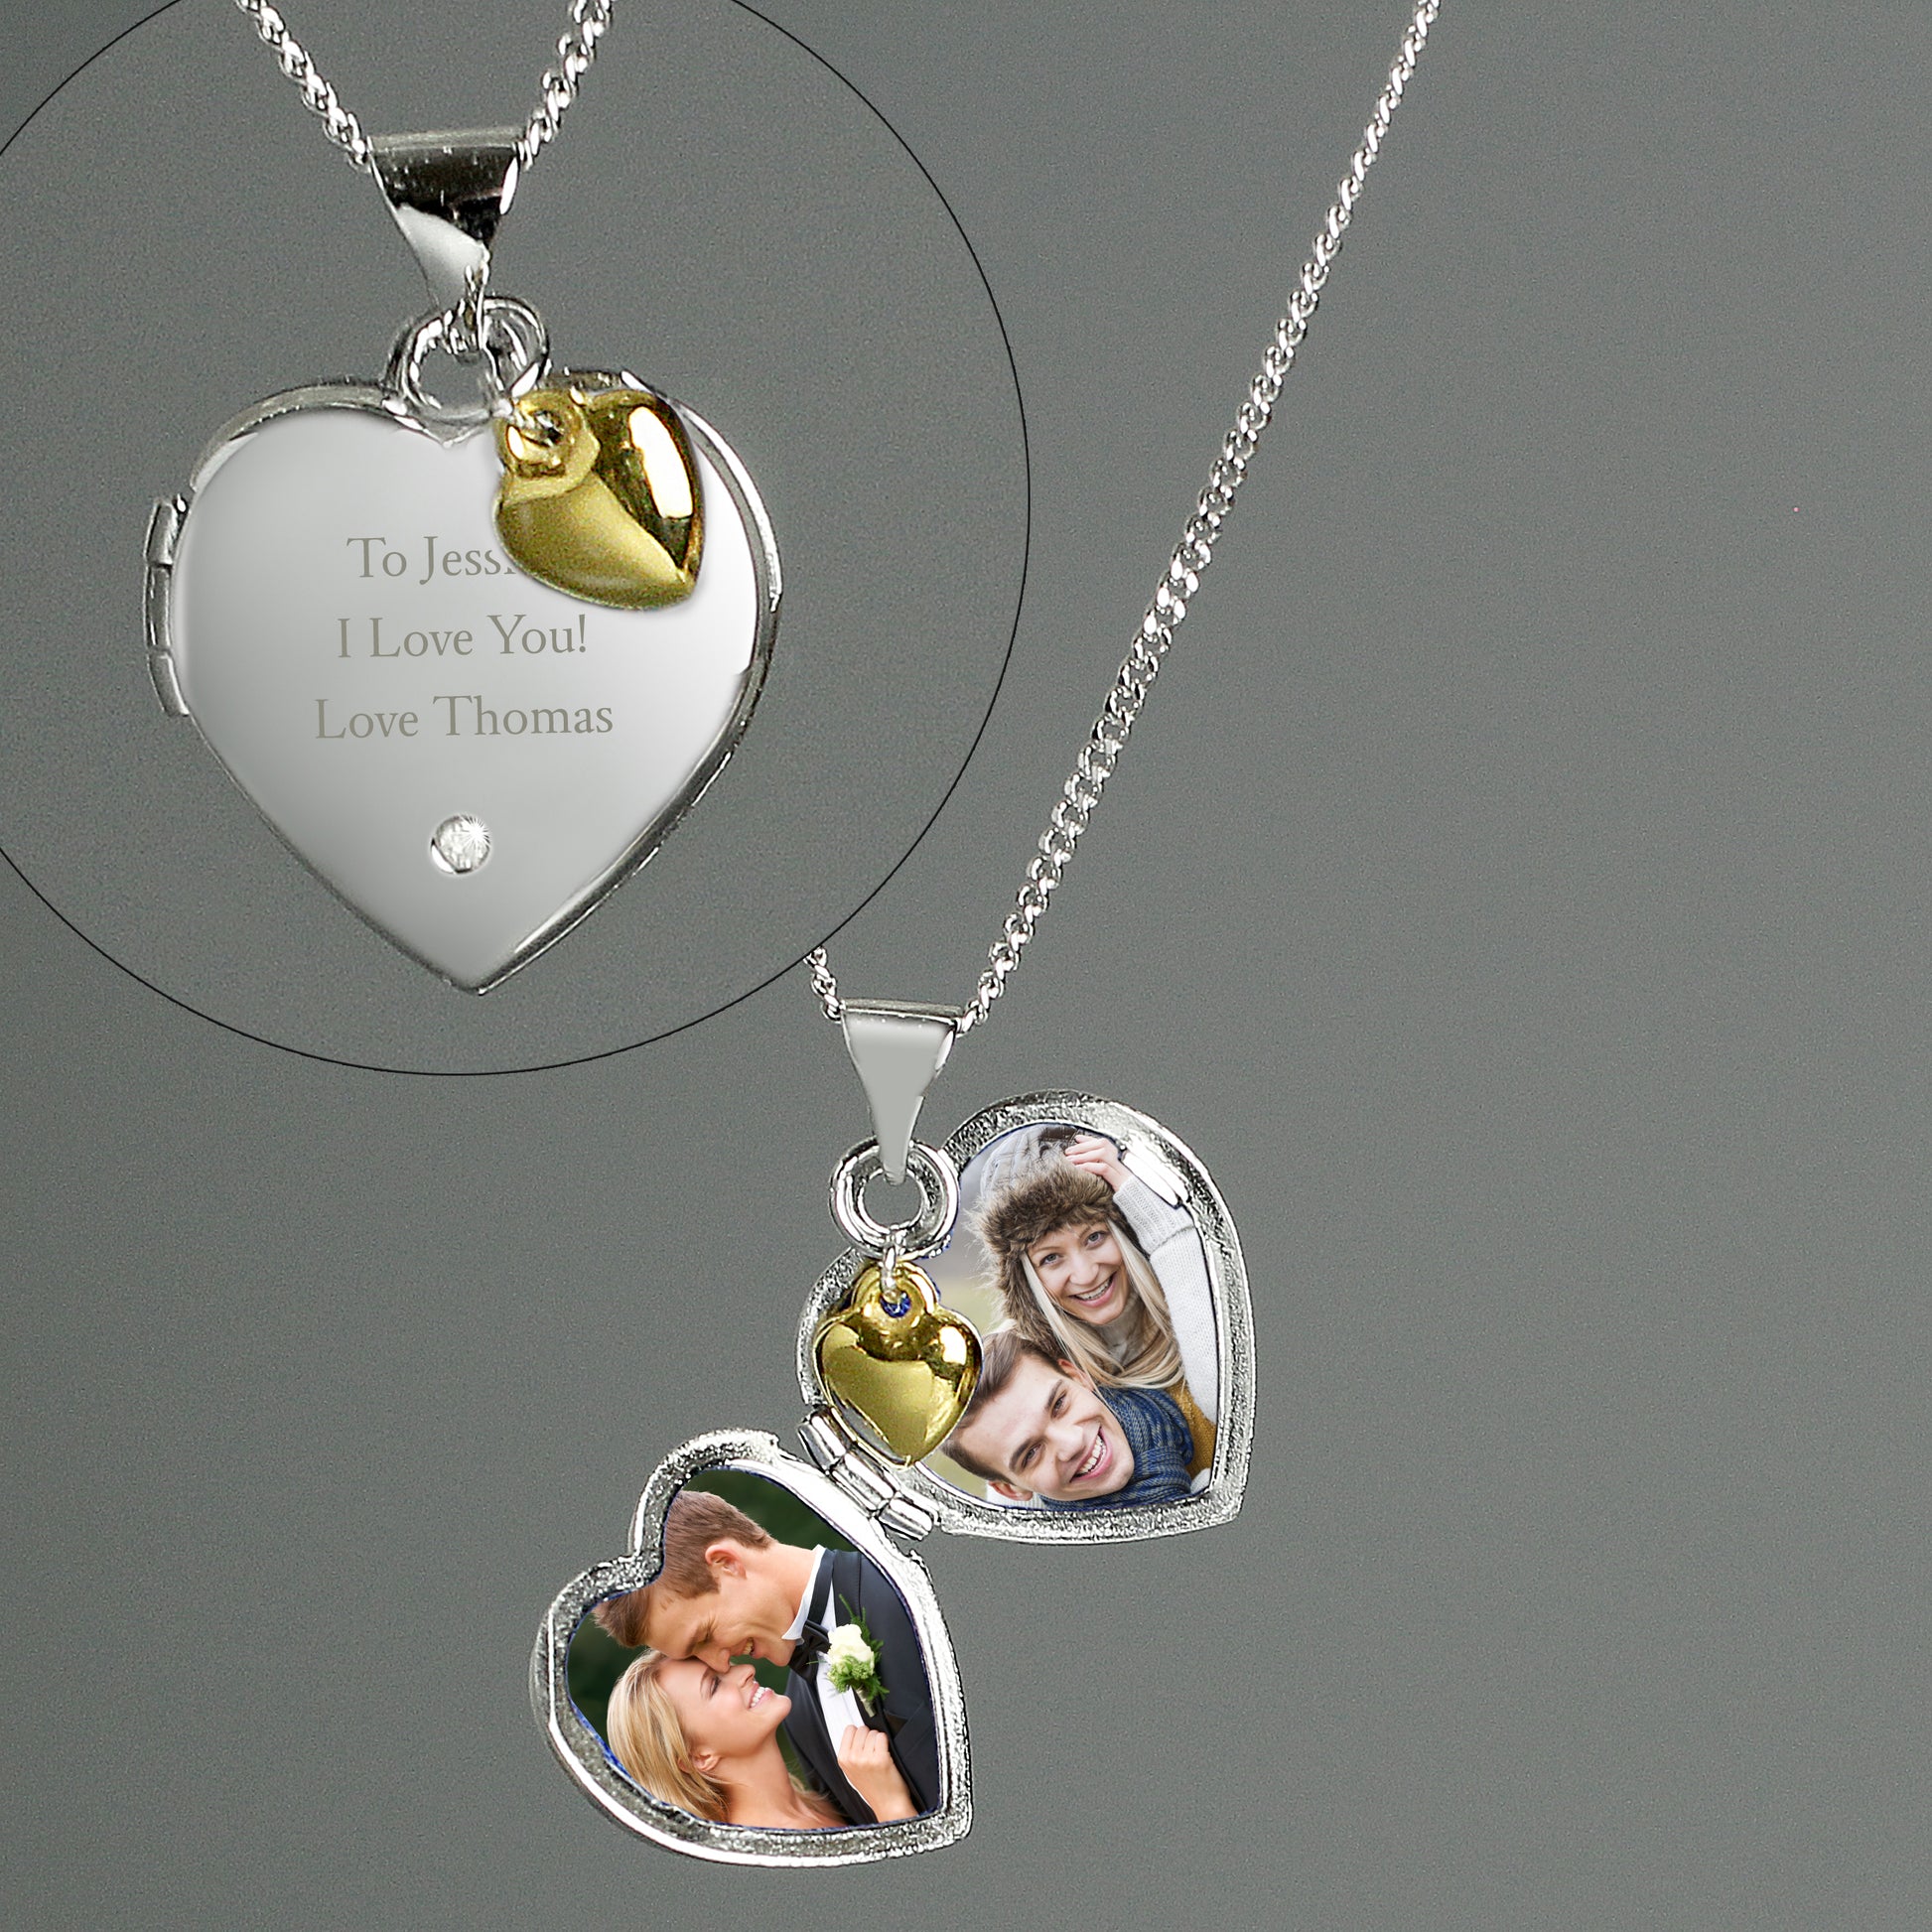 sterling silver heart shaped locket with engraved message and tiny gold heart, opened to show photos